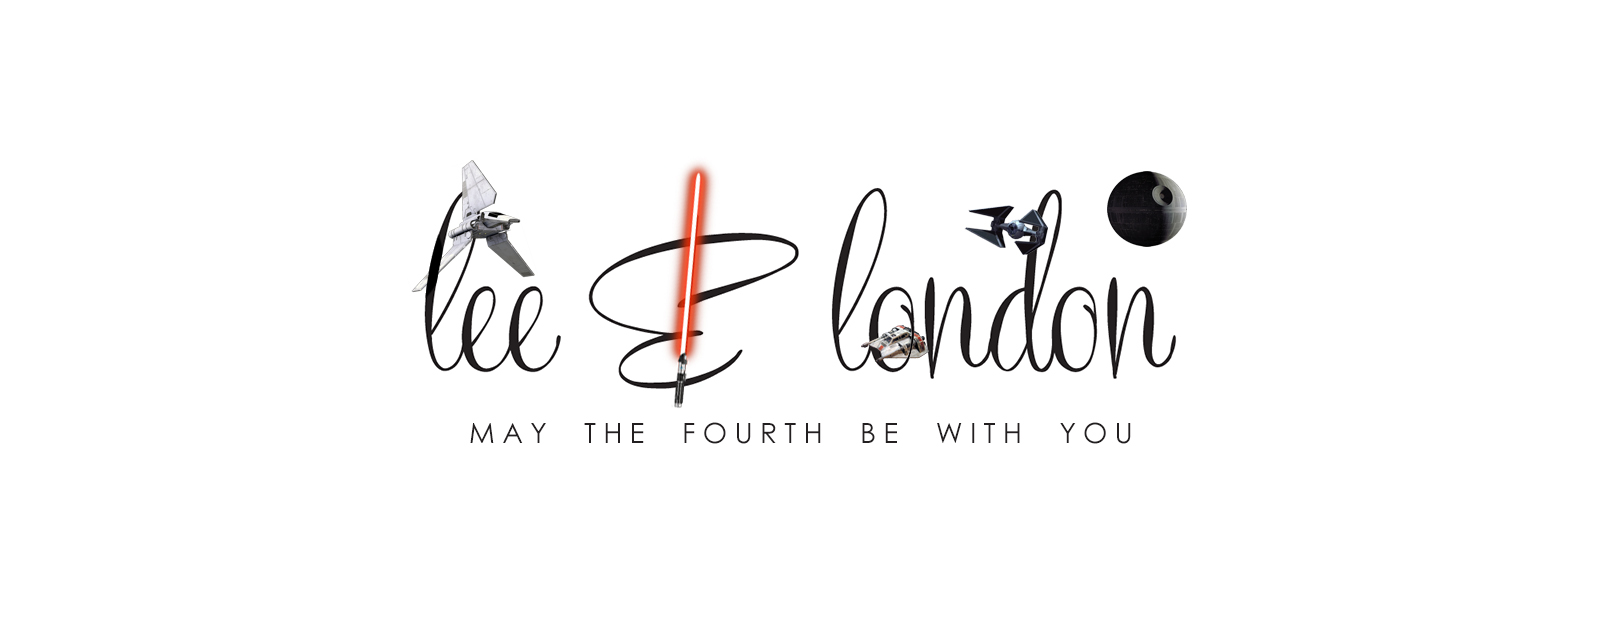 4 PR Blunders by the Galactic Empire – May the Fourth Be with You